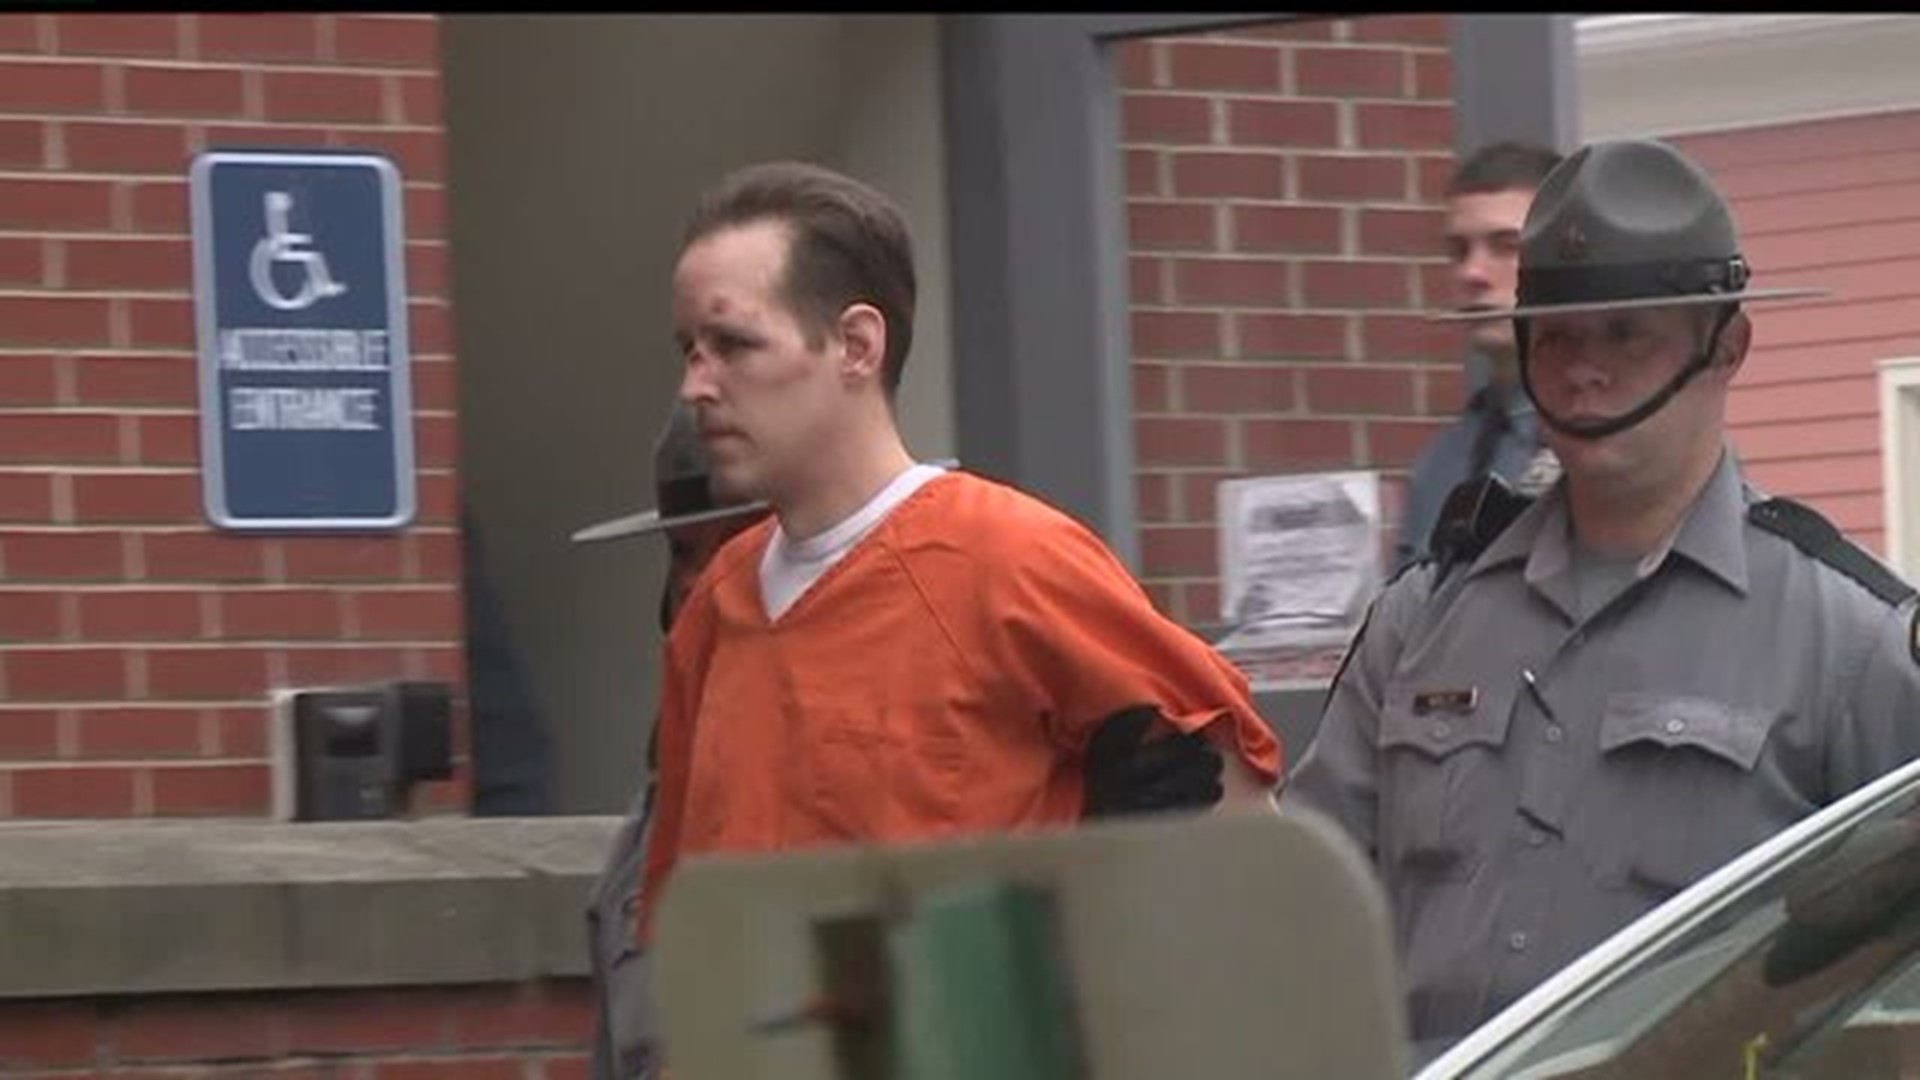 Eric Frein used technology to hide from police